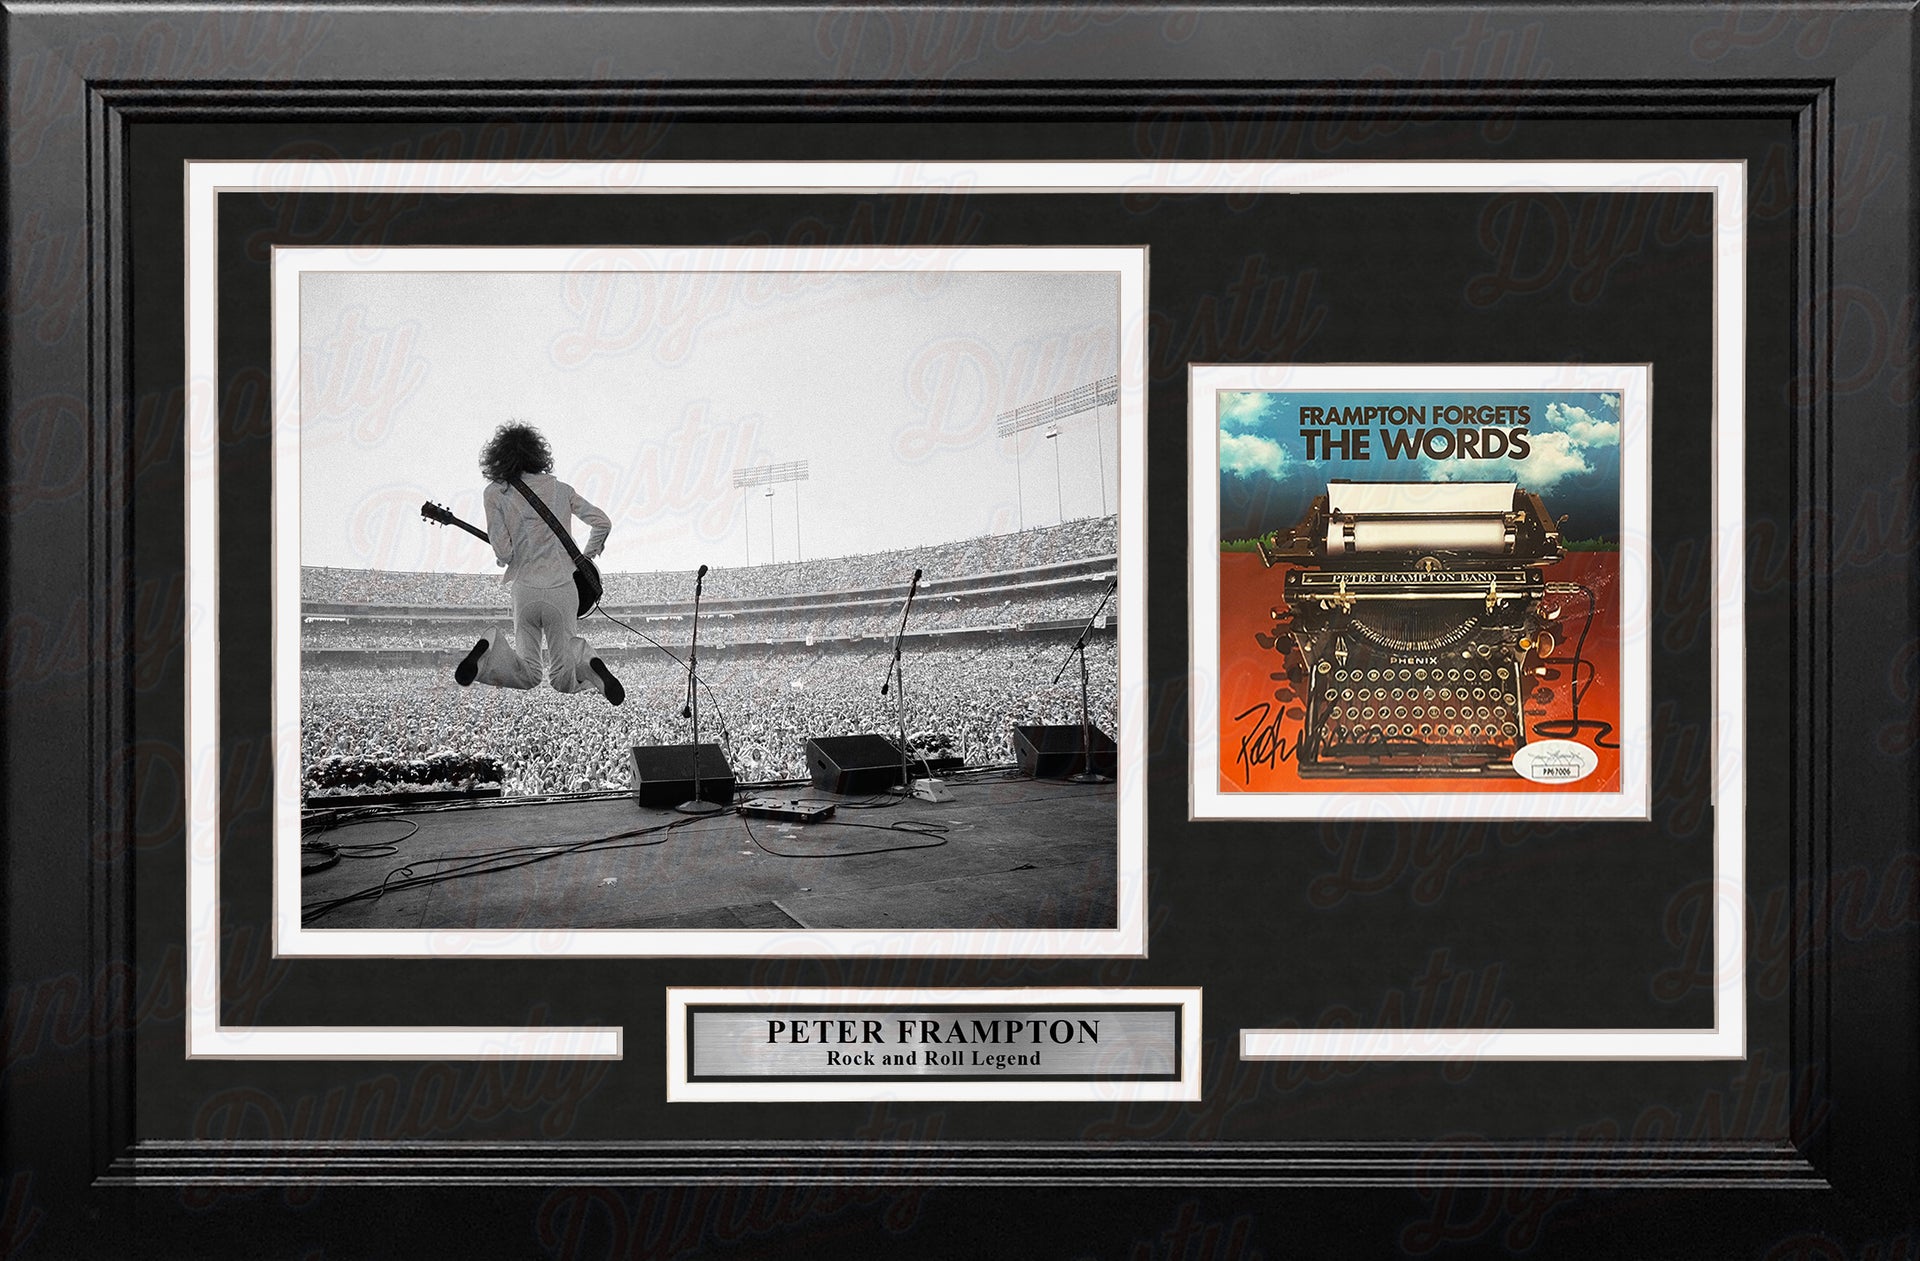 Peter Frampton Autographed Forgets the Words CD Booklet with Framed Photo Collage - Dynasty Sports & Framing 